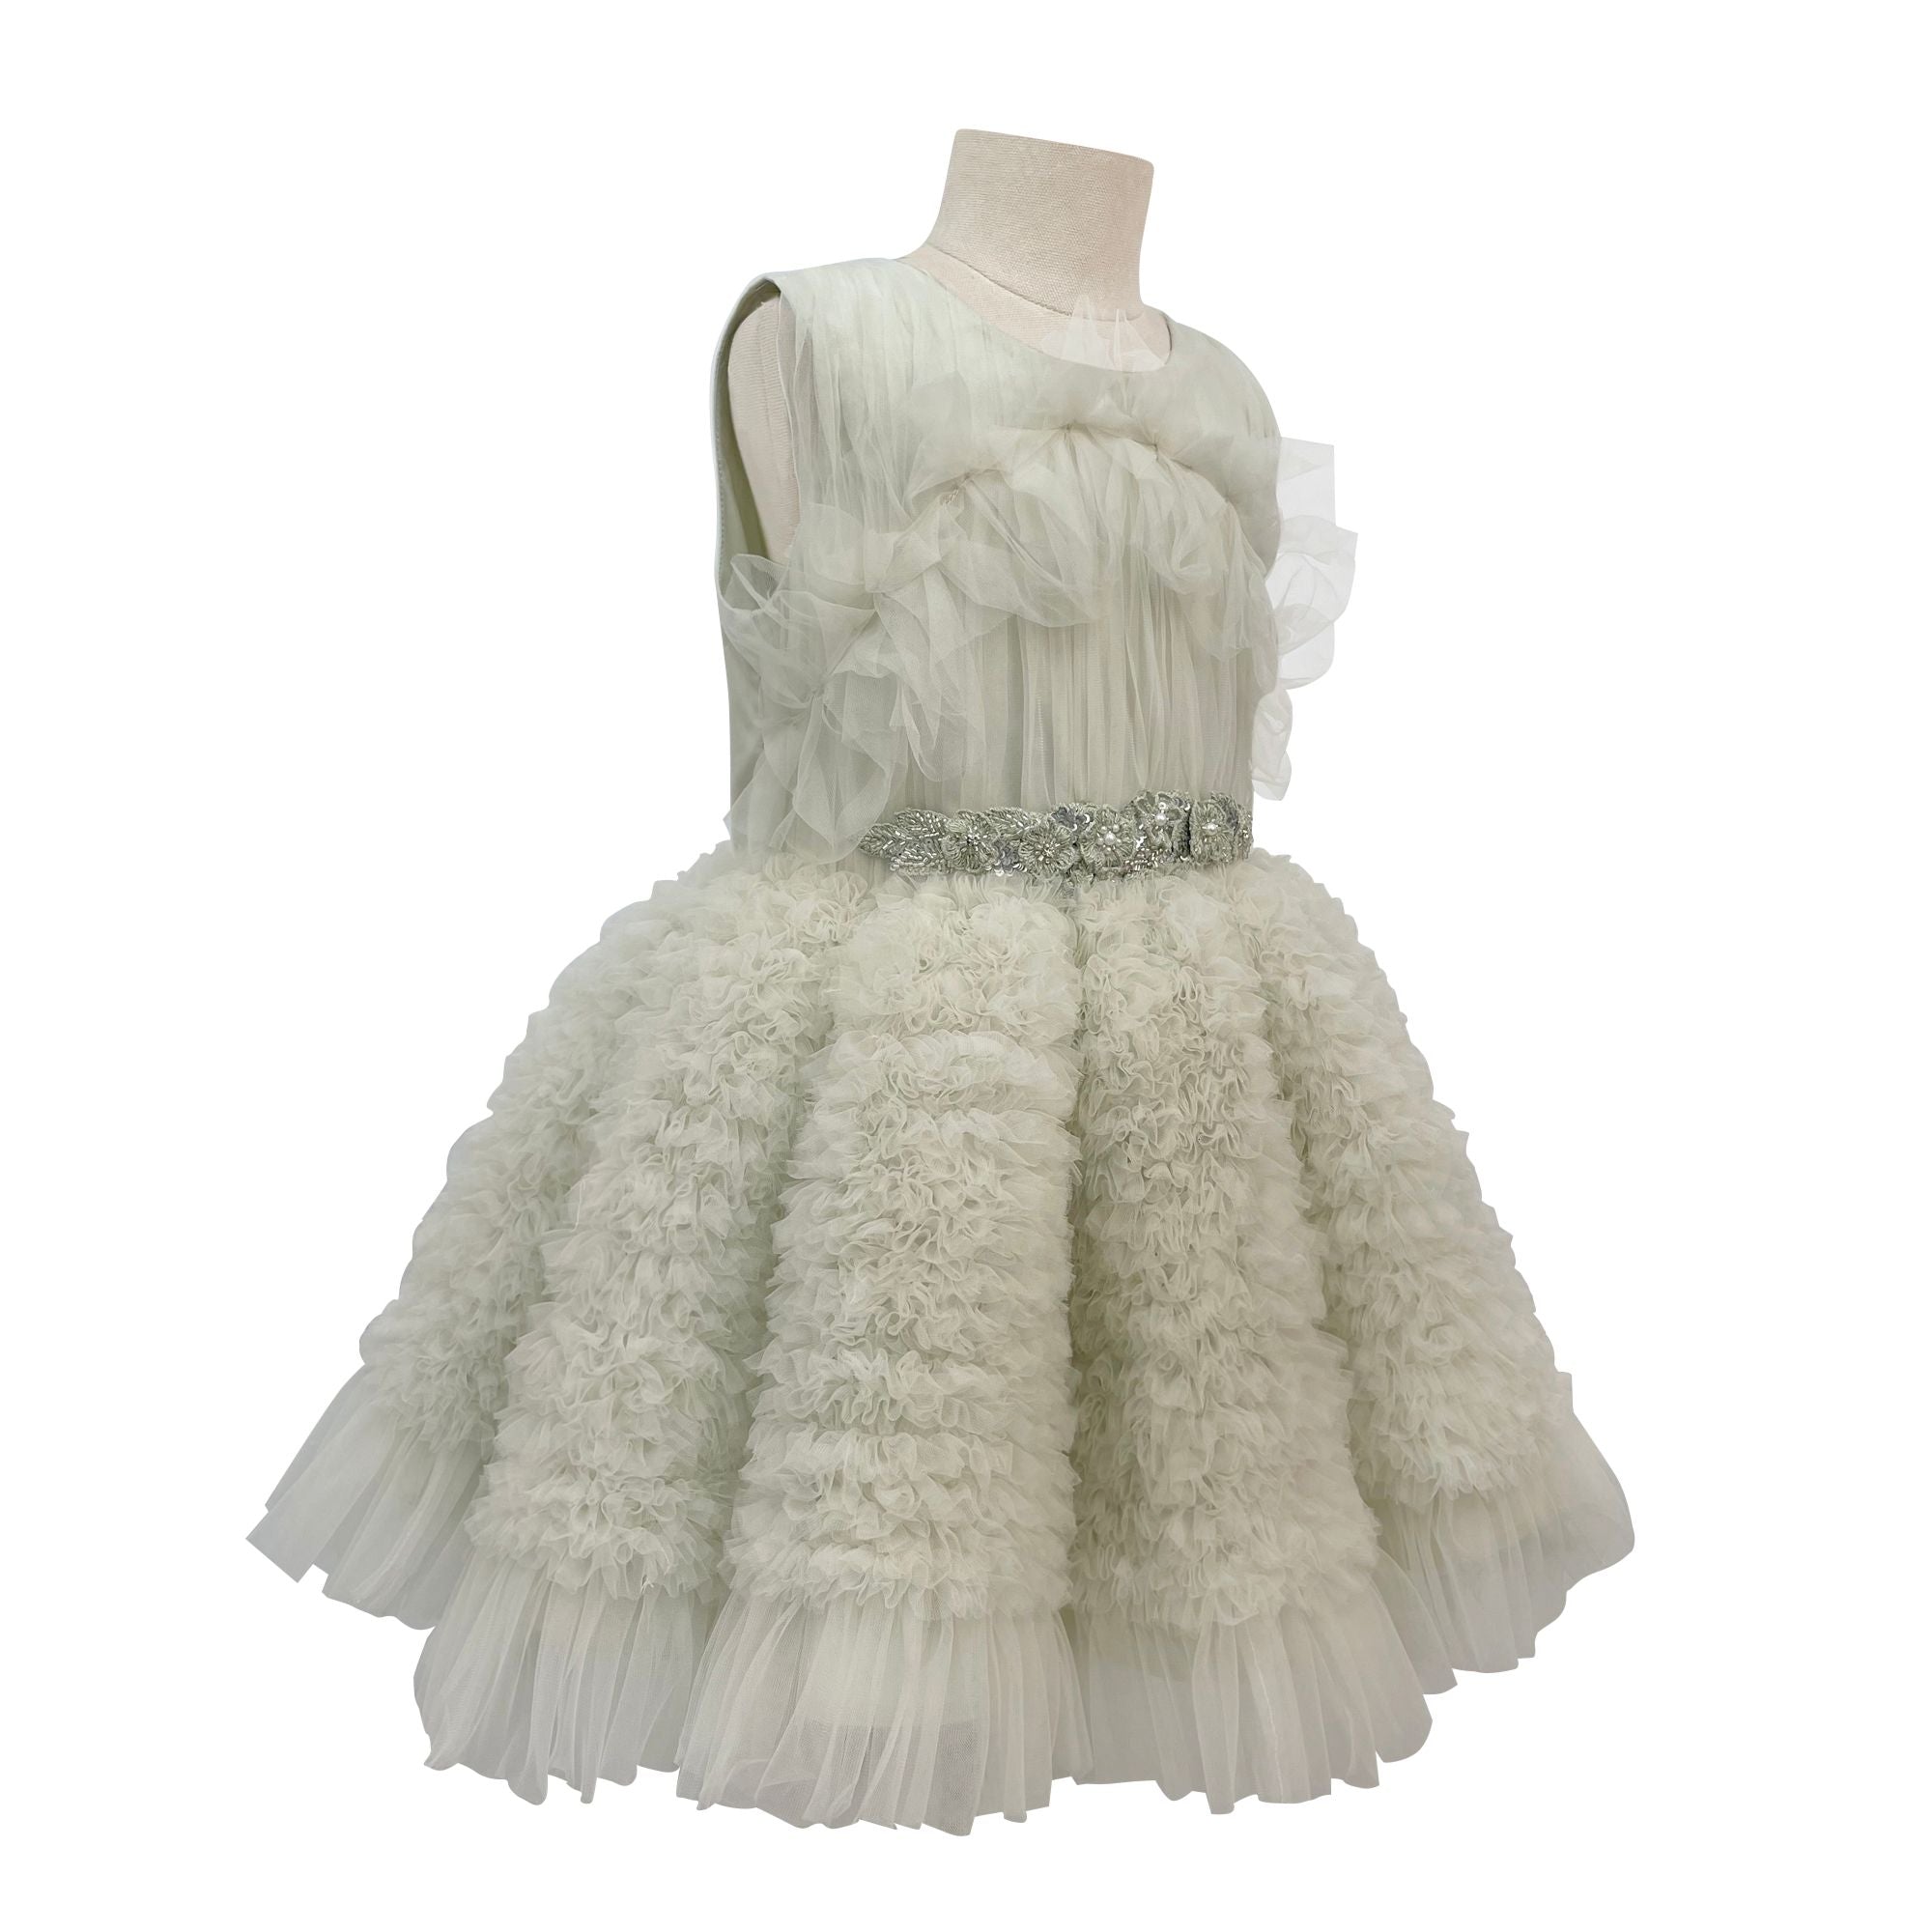 The Embellished Ariel Tulle Dress (Green)